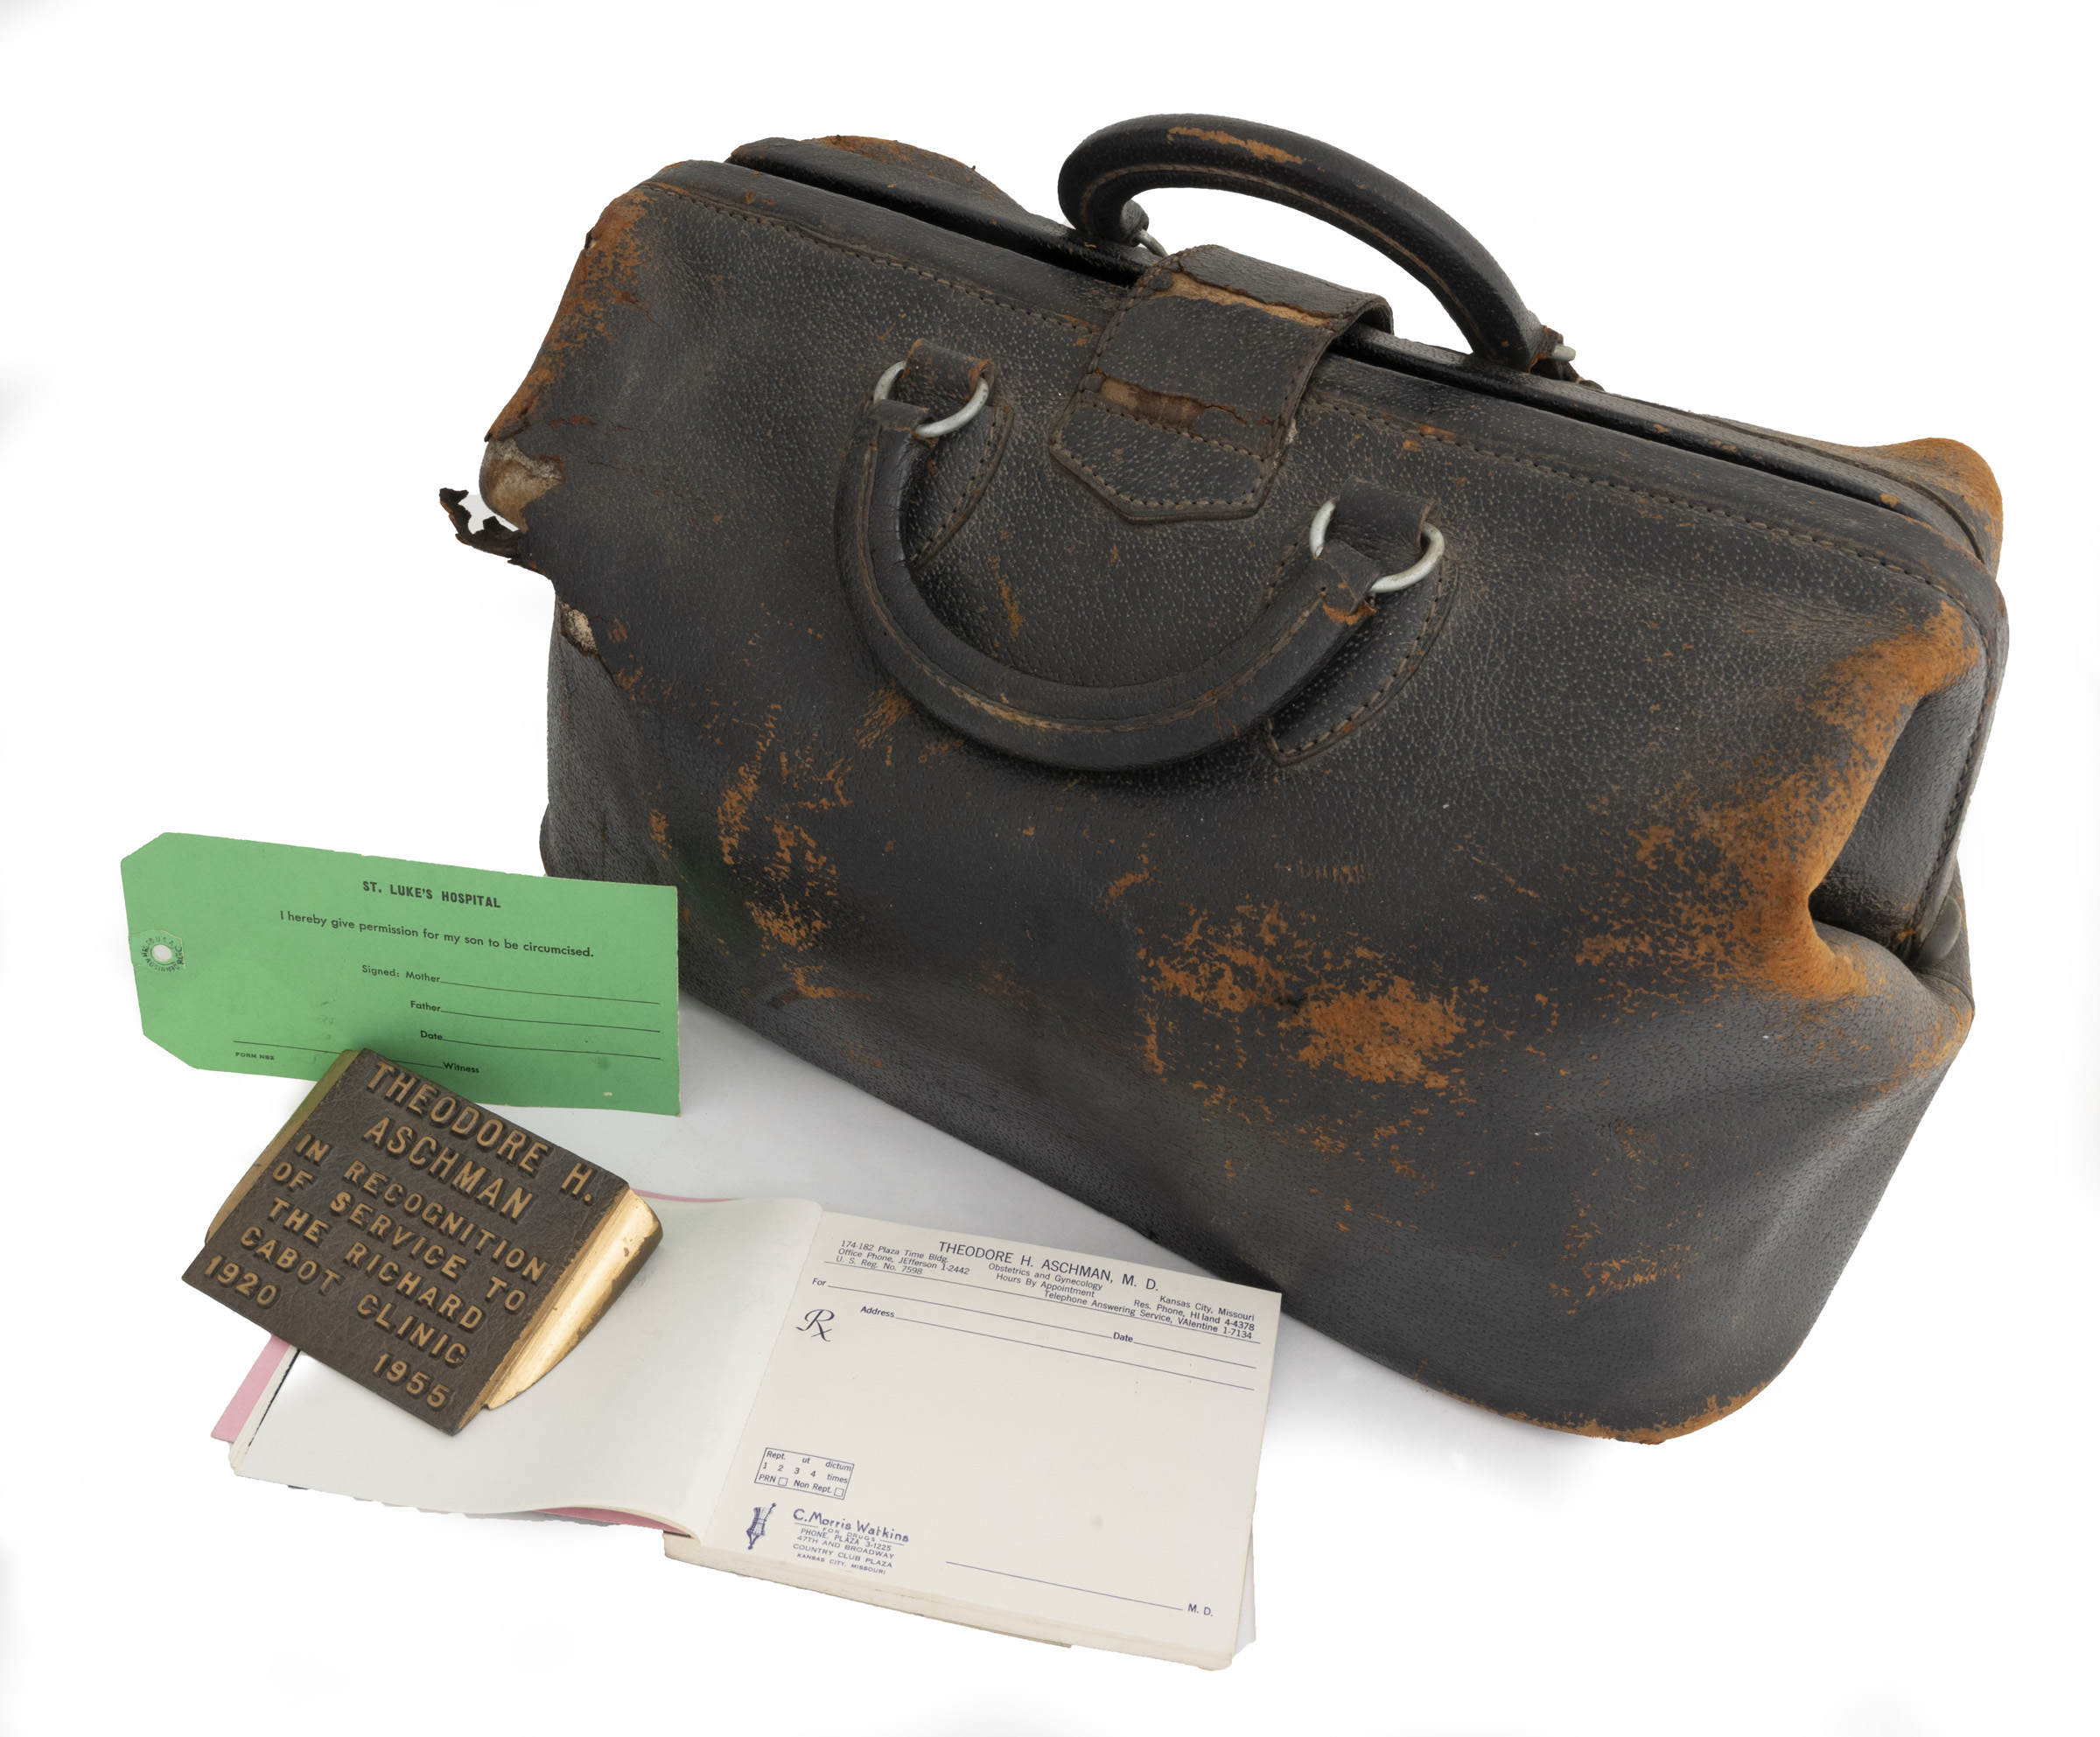 Worn brown leather doctor's bag with plaque, tag, and prescription book